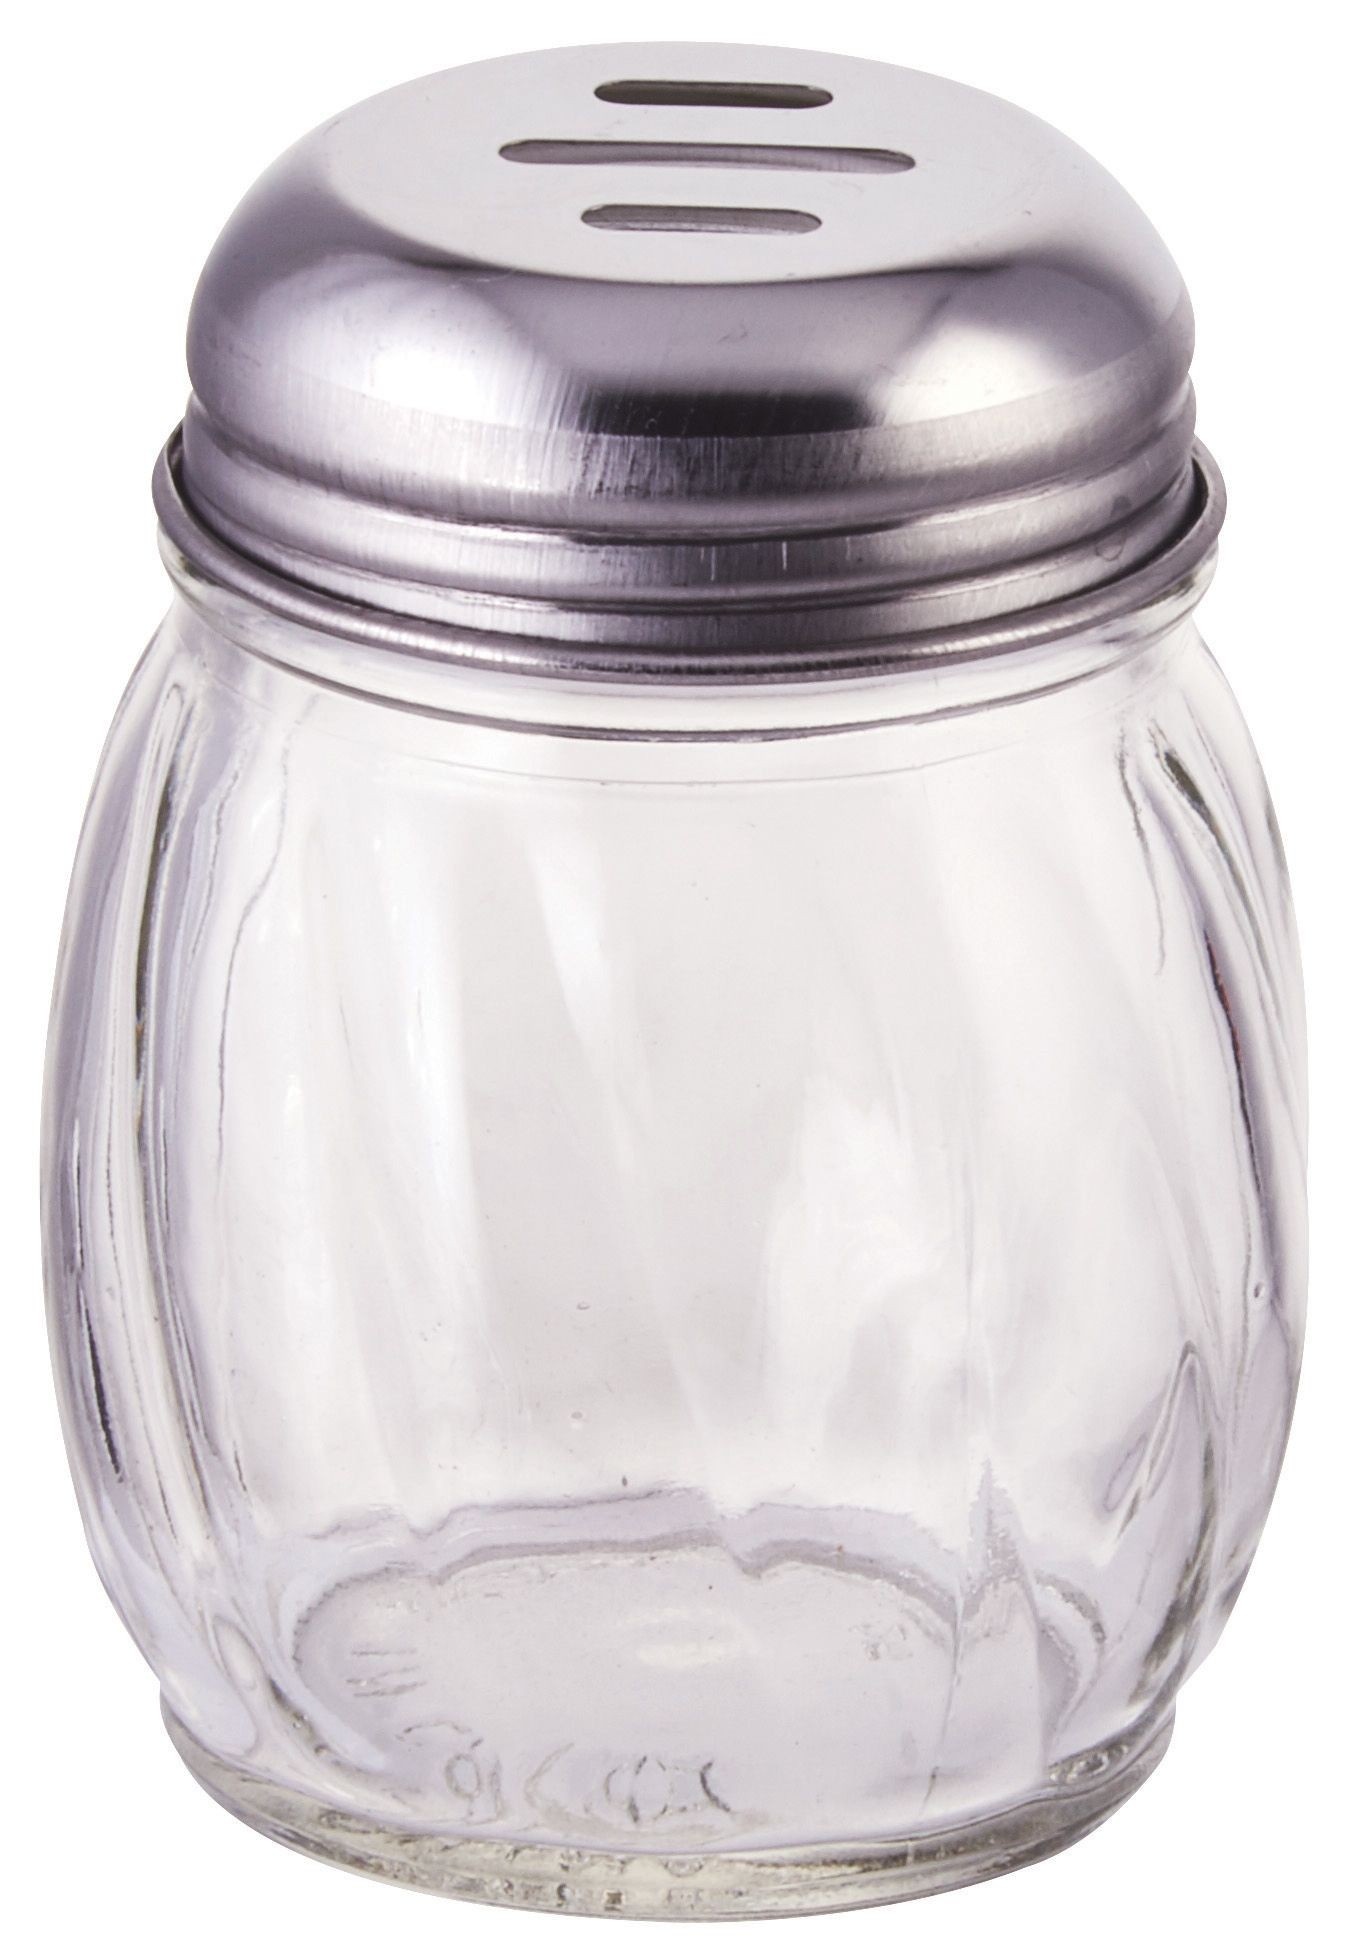 Winco G-108 Cheese Shaker 6 oz. with Slotted Top